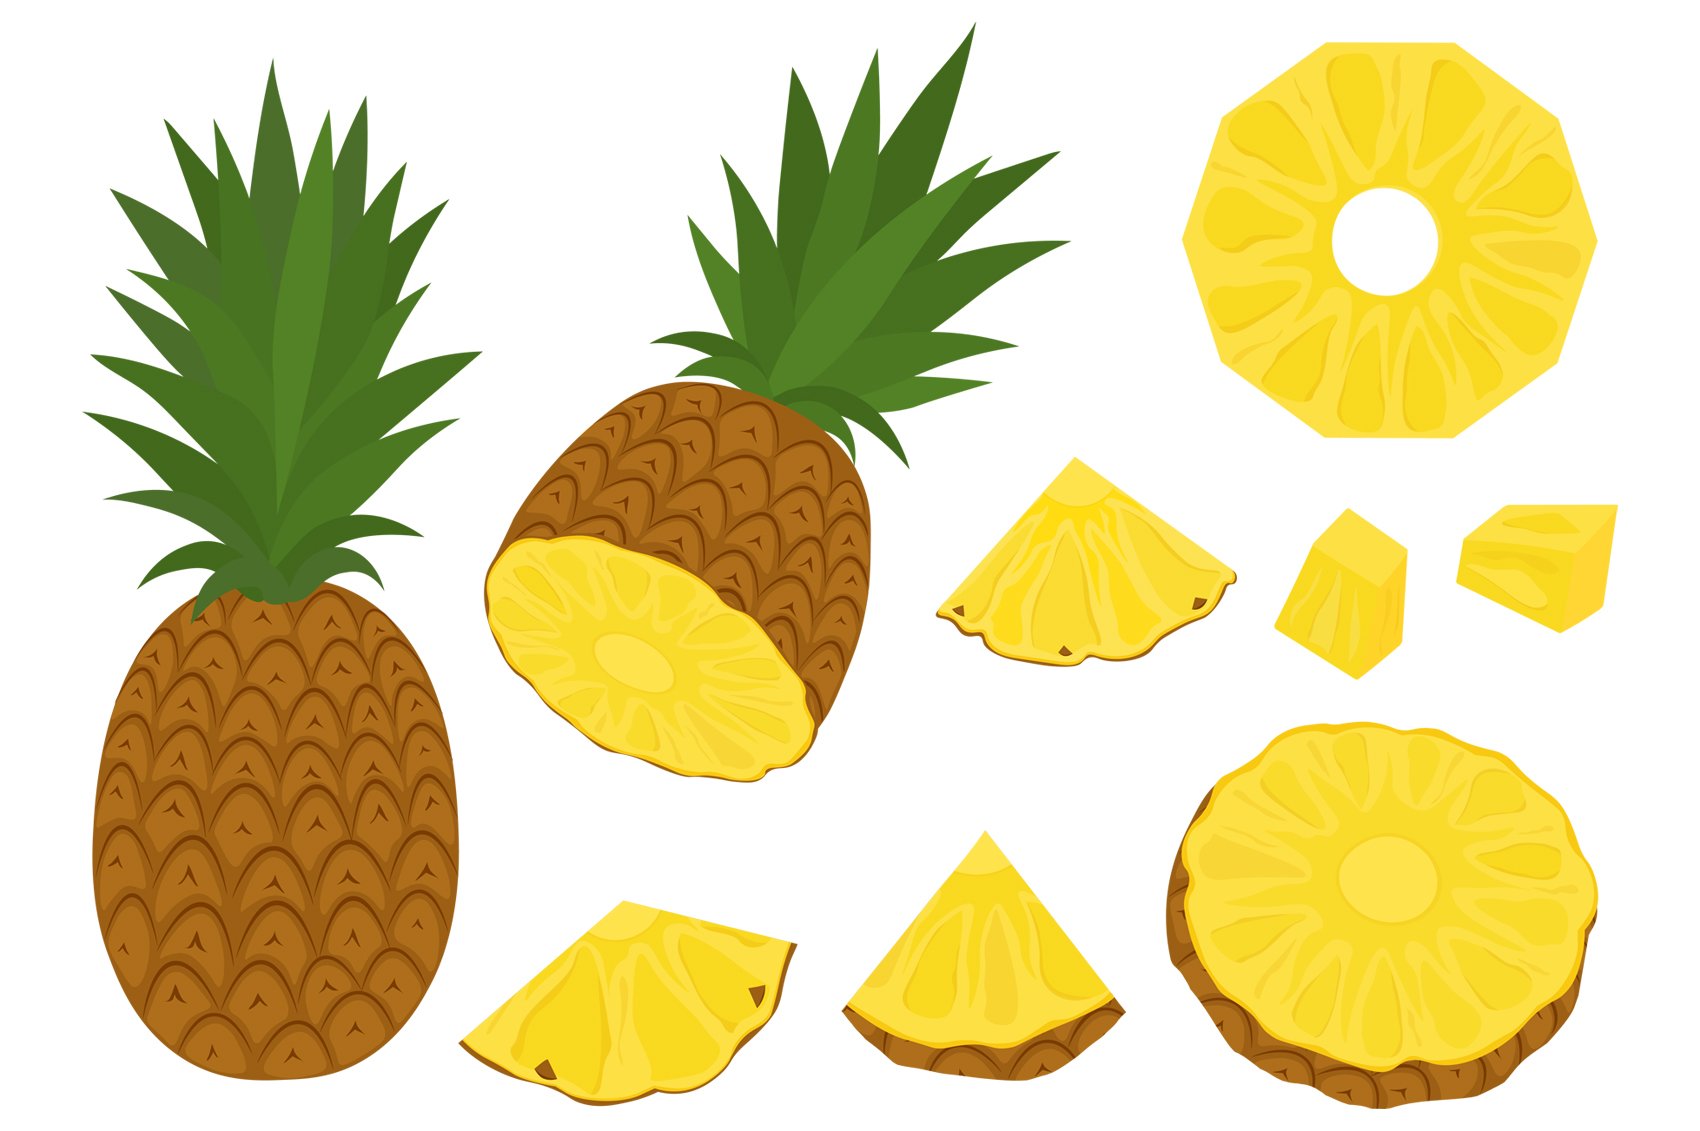 Some parts of the pineapple.